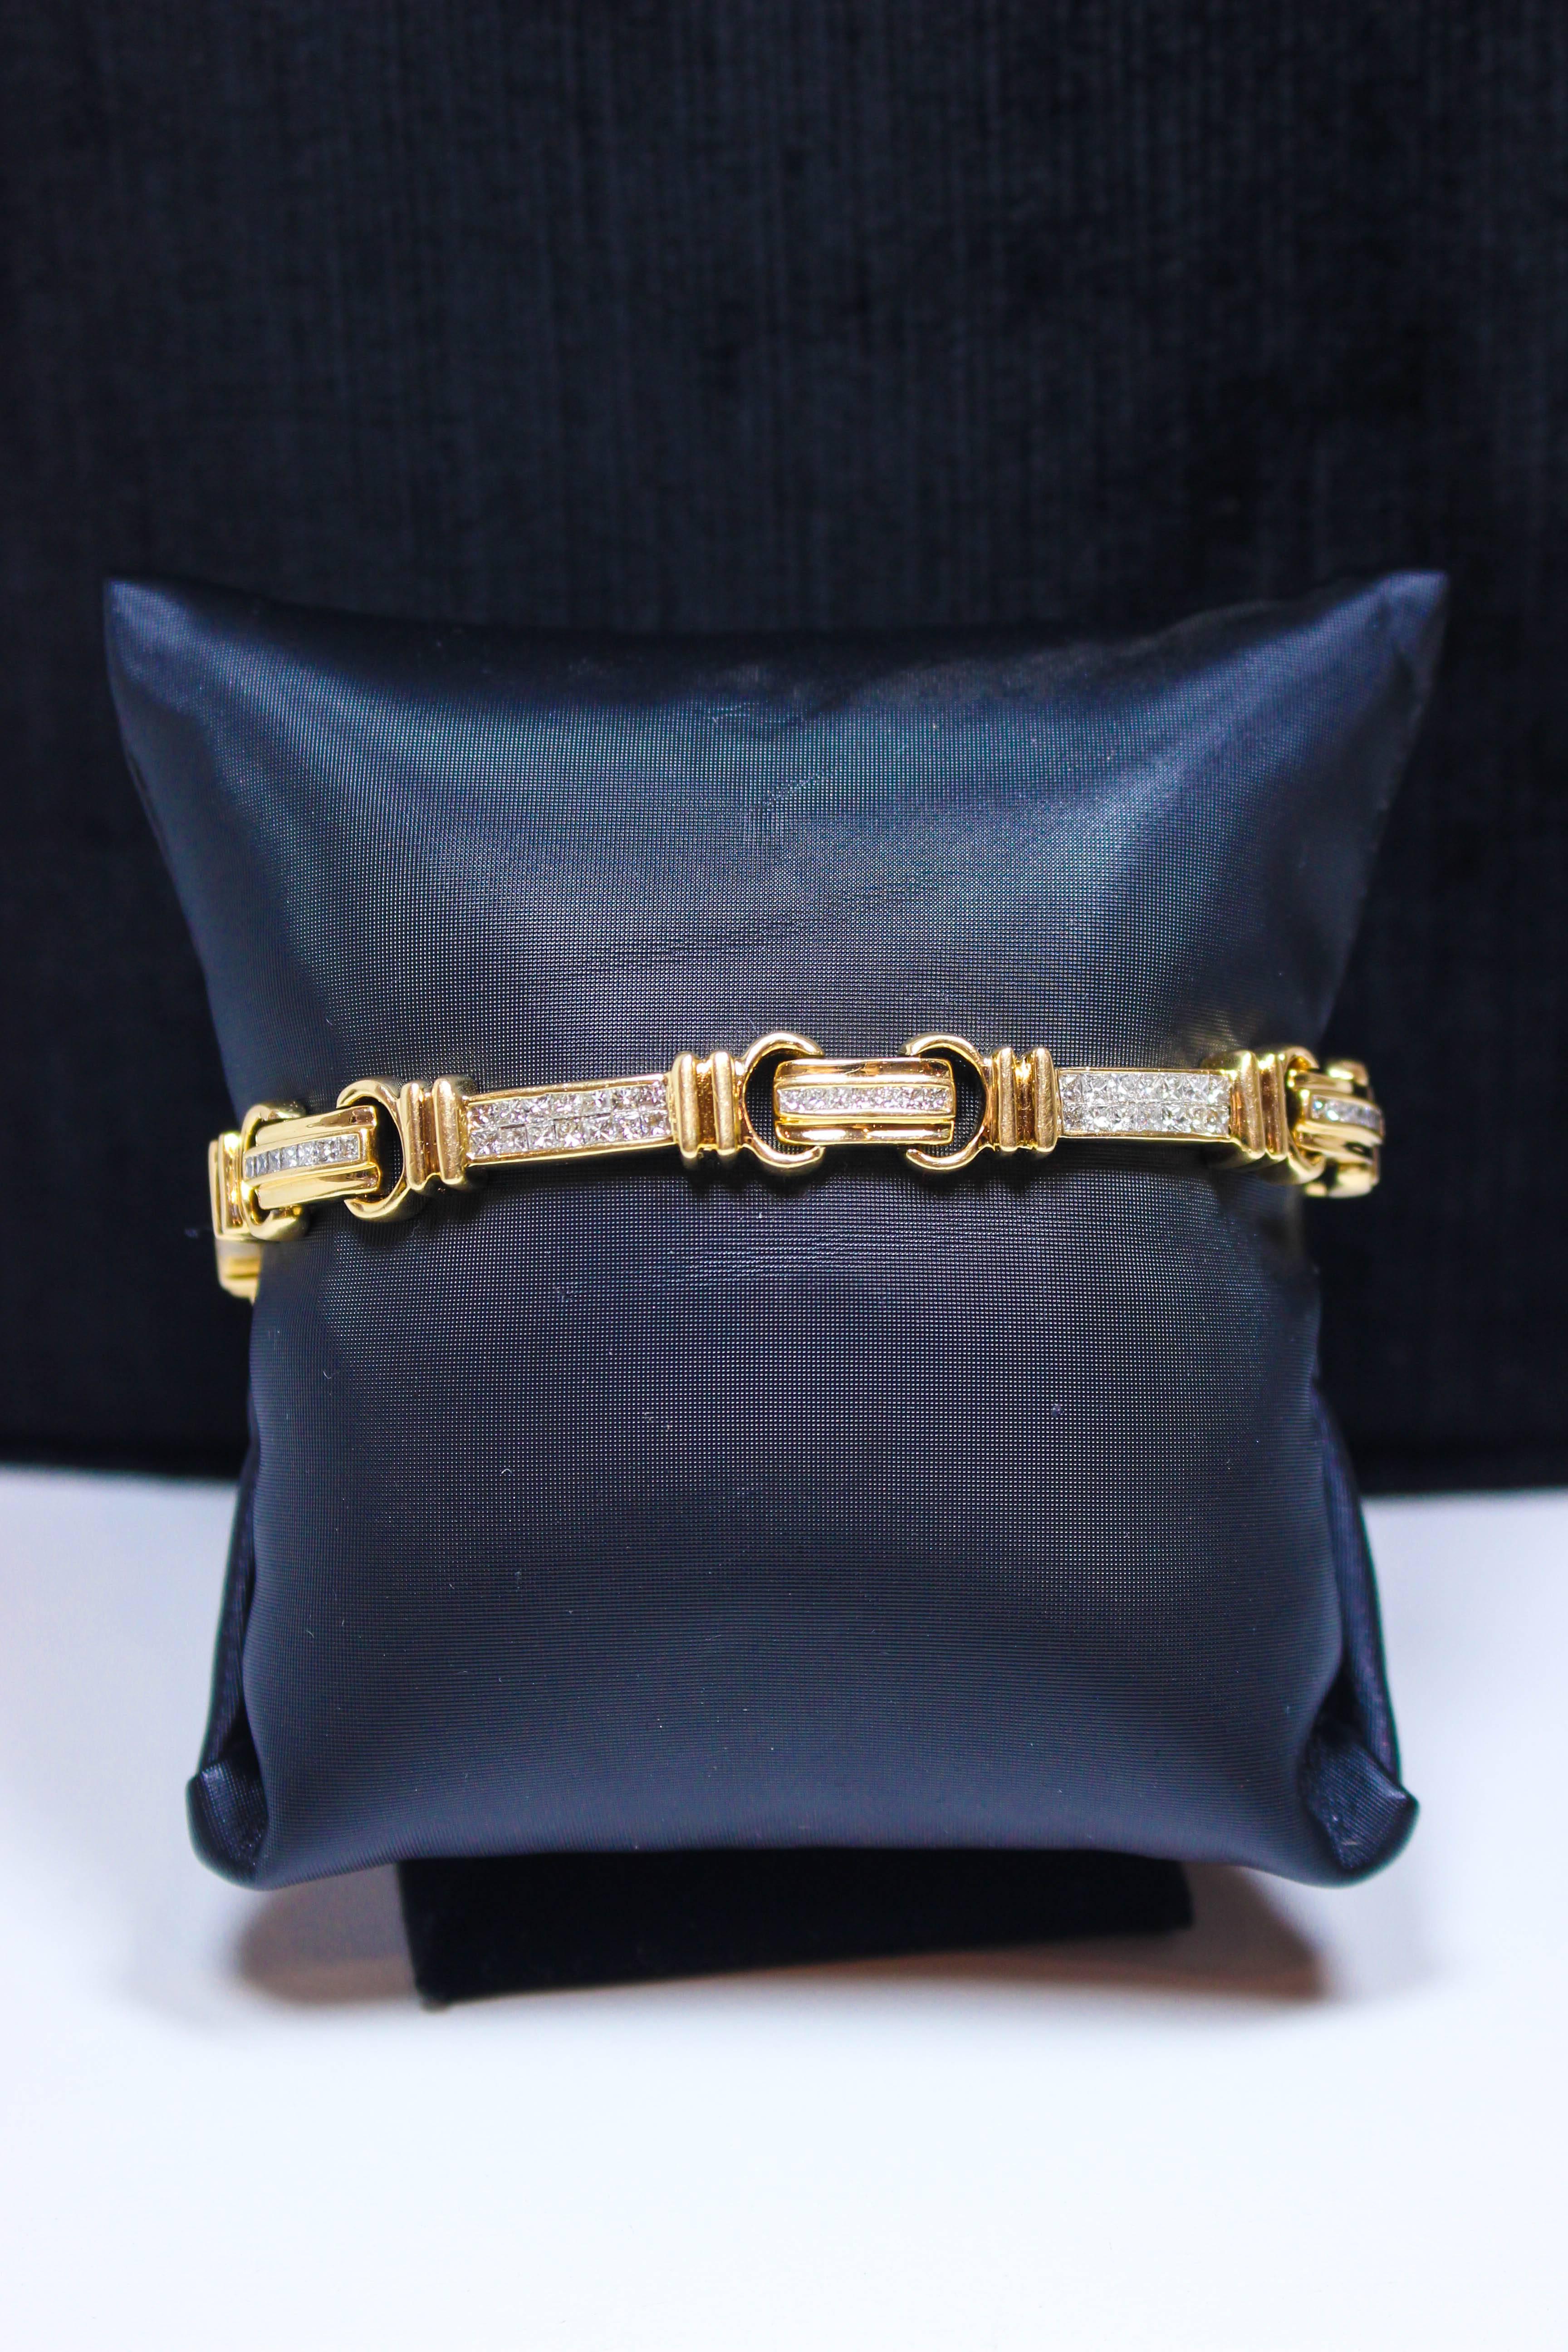 This bracelet is composed of 14kt white and yellow gold with square cut diamonds. Unisex featuring a clasp closure. Specs below. In excellent condition.

Please feel free to ask any questions you may have, we are happy to assist. 

Specs:
14 KT